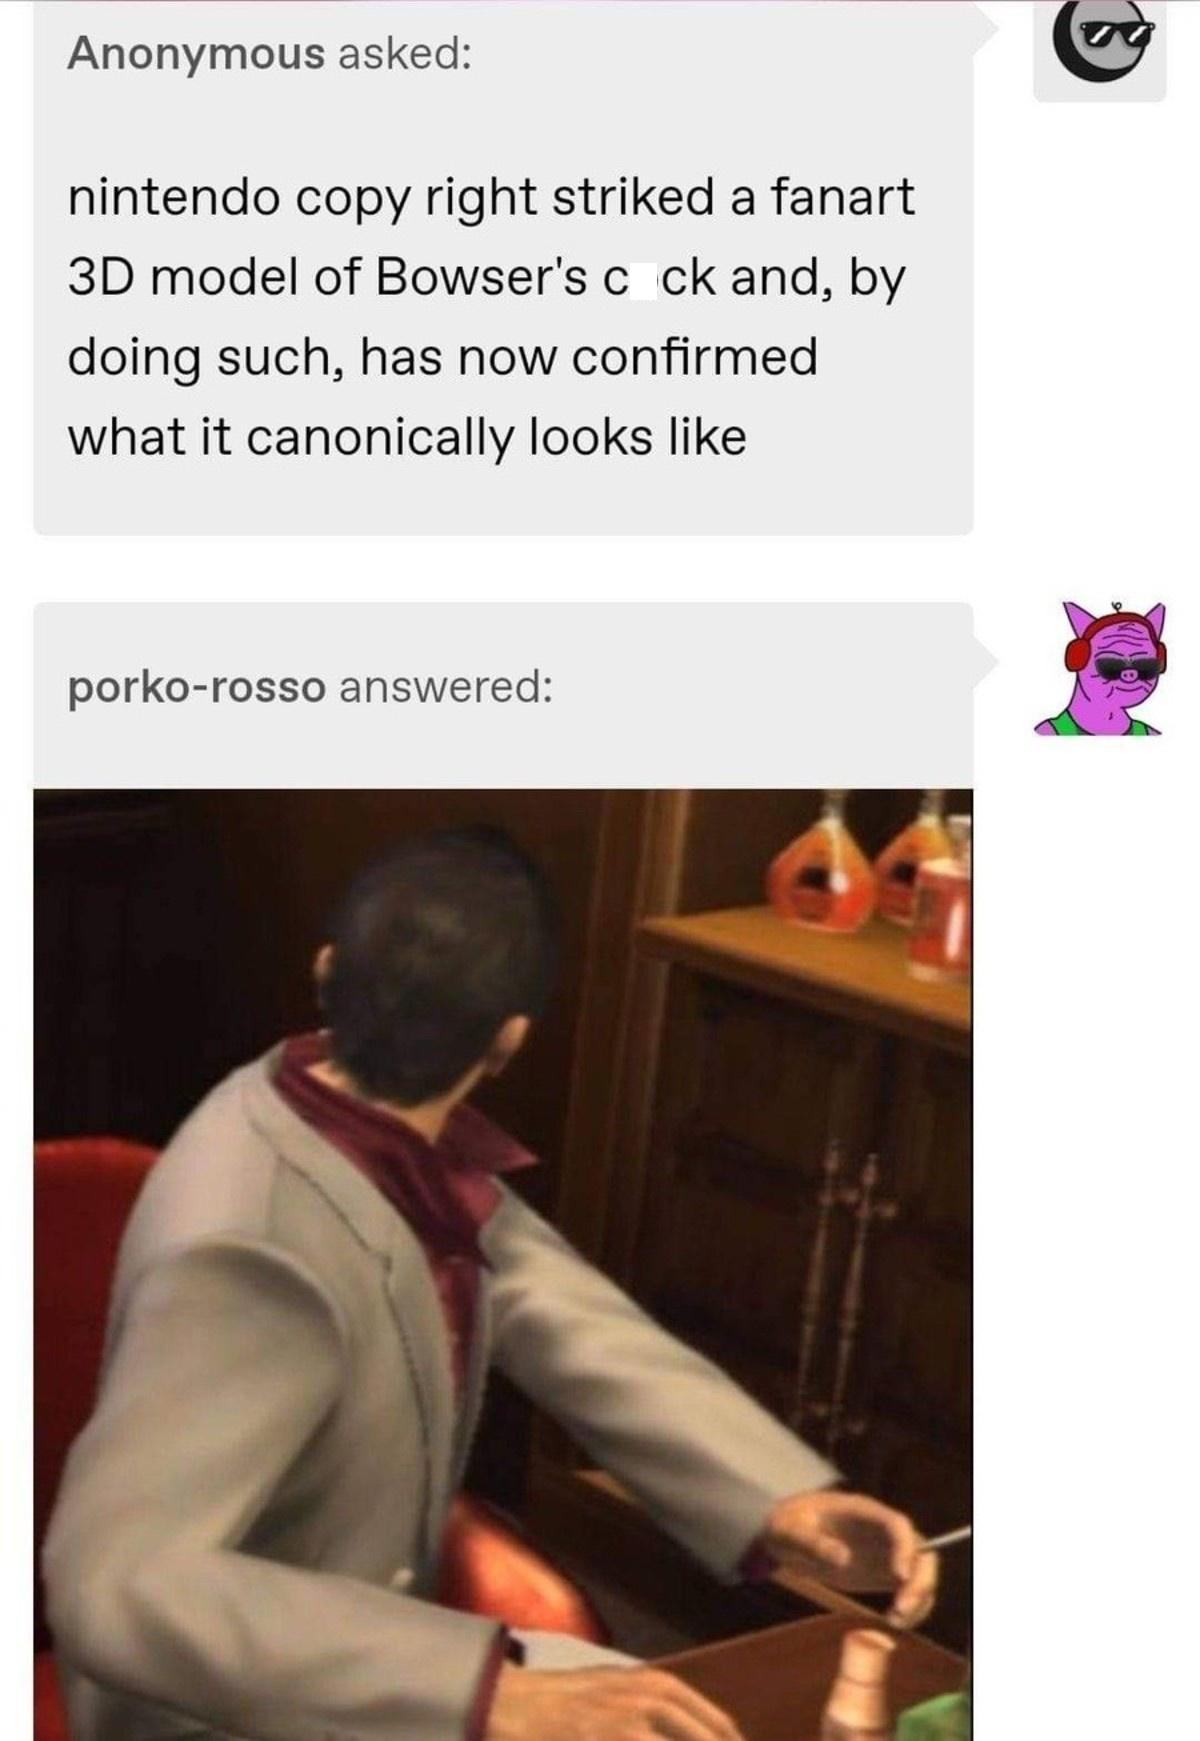 fresh memes - bowser cock canon - Anonymous asked nintendo copy right striked a fanart 3D model of Bowser's cock and, by doing such, has now confirmed what it canonically looks porkorosso answered